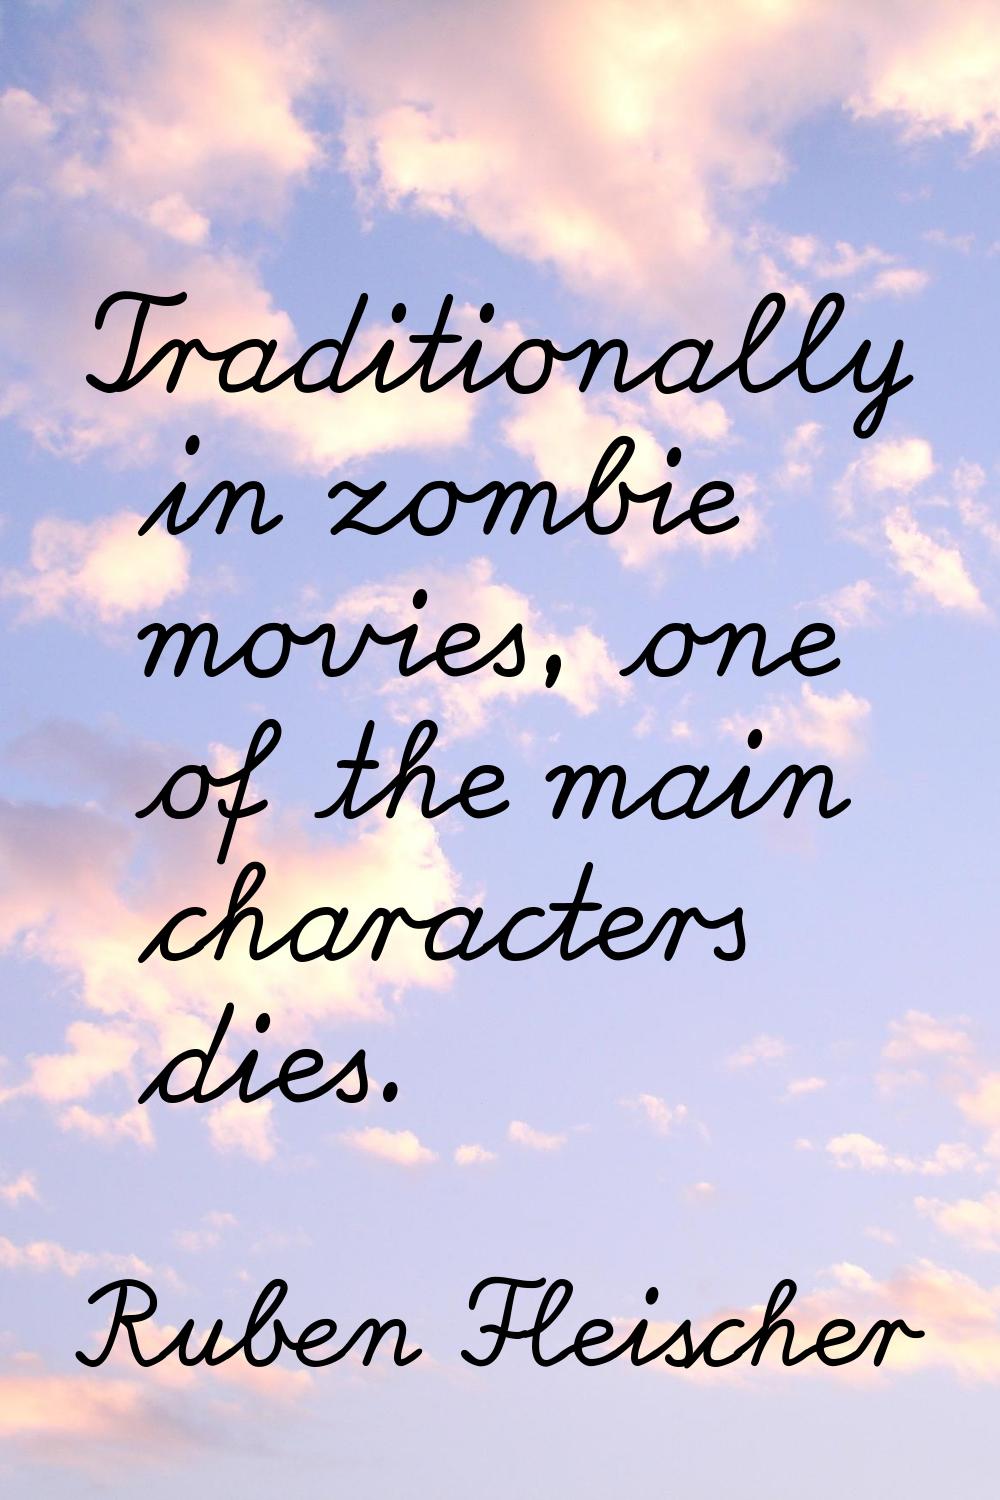 Traditionally in zombie movies, one of the main characters dies.